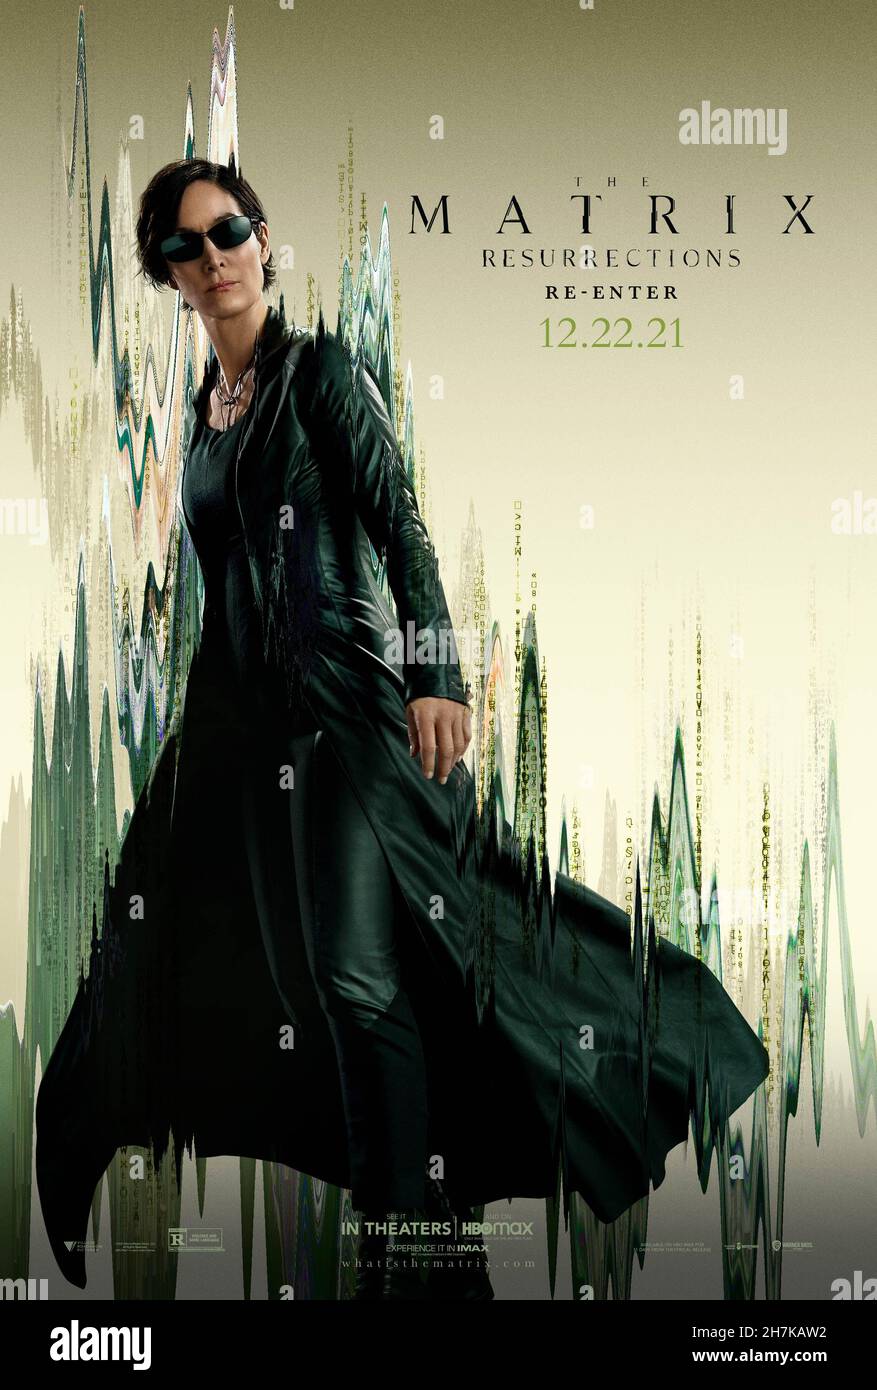 RELEASE DATE: December 22, 2021 TITLE: The Matrix Resurrections STUDIO: Village Roadshow Pictures DIRECTOR: Lana Wachowski PLOT: Unknown STARRING: CARRIE-ANNE MOSS as Trinity poster art. (Credit Image: © Village Roadshow Pictures/Entertainment Pictures Stock Photo